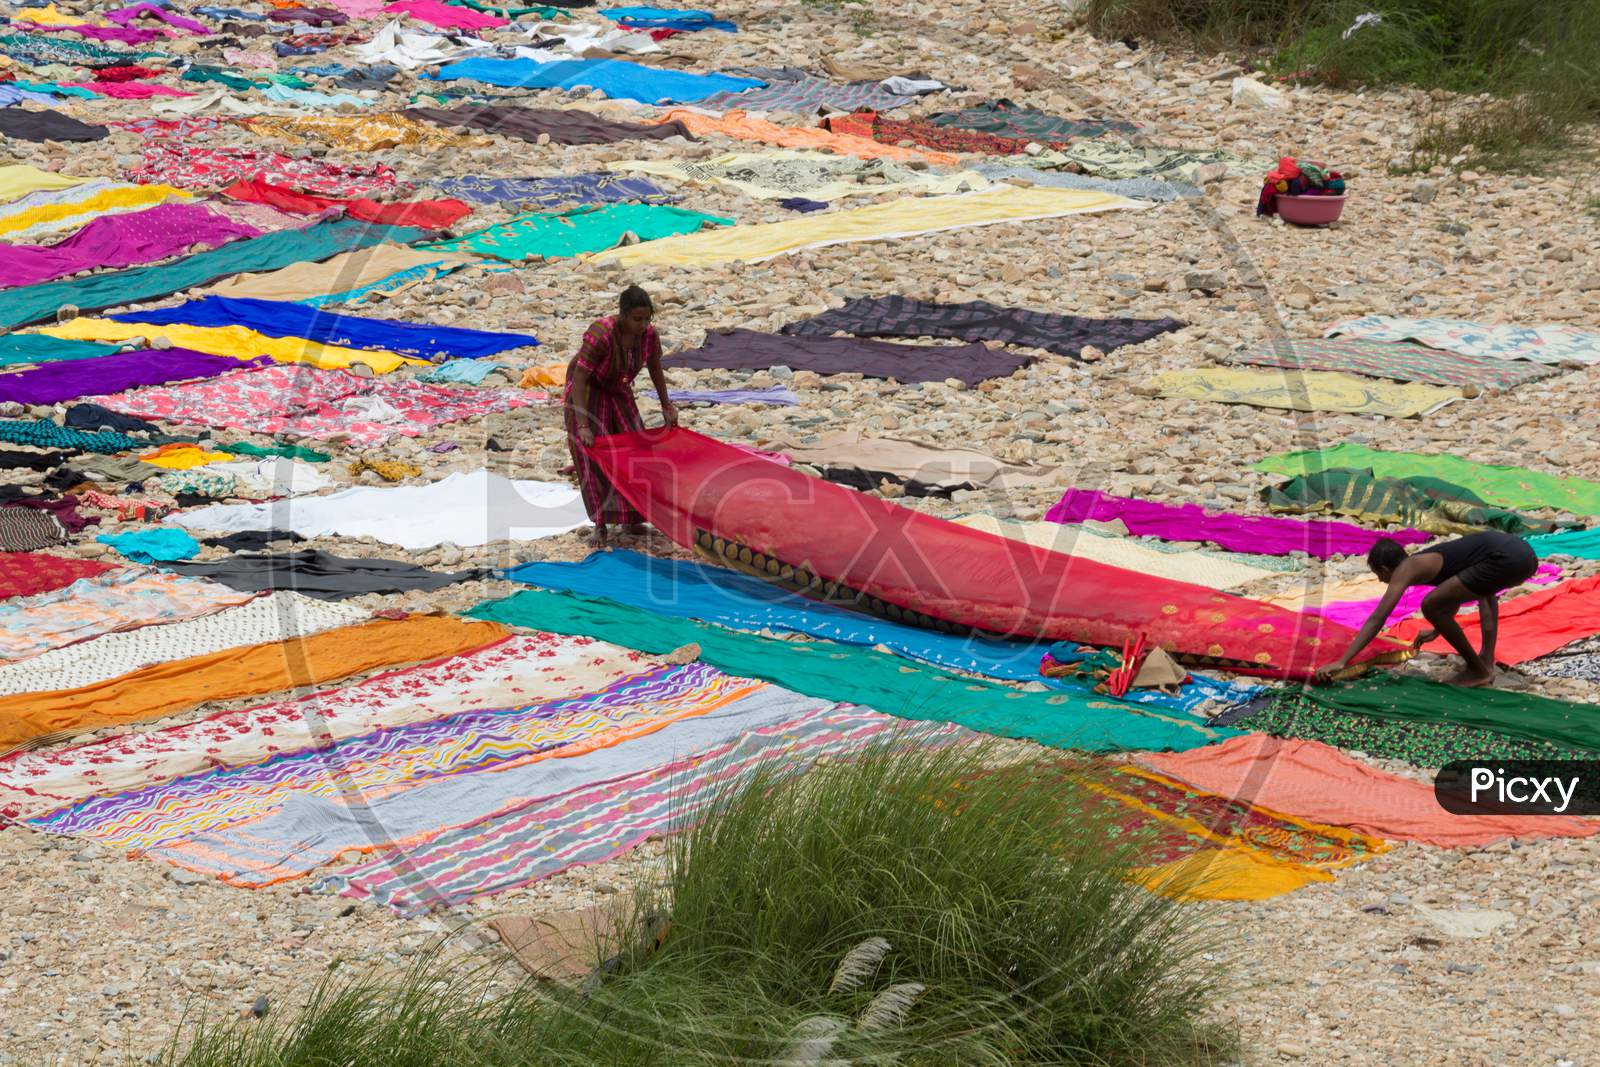 A Colorful view of Laundry workers seen placing the Indian Saris for Drying under the natural Sunlight by the side of river Cauvery in the countryside near Mysuru in Karnataka/India.